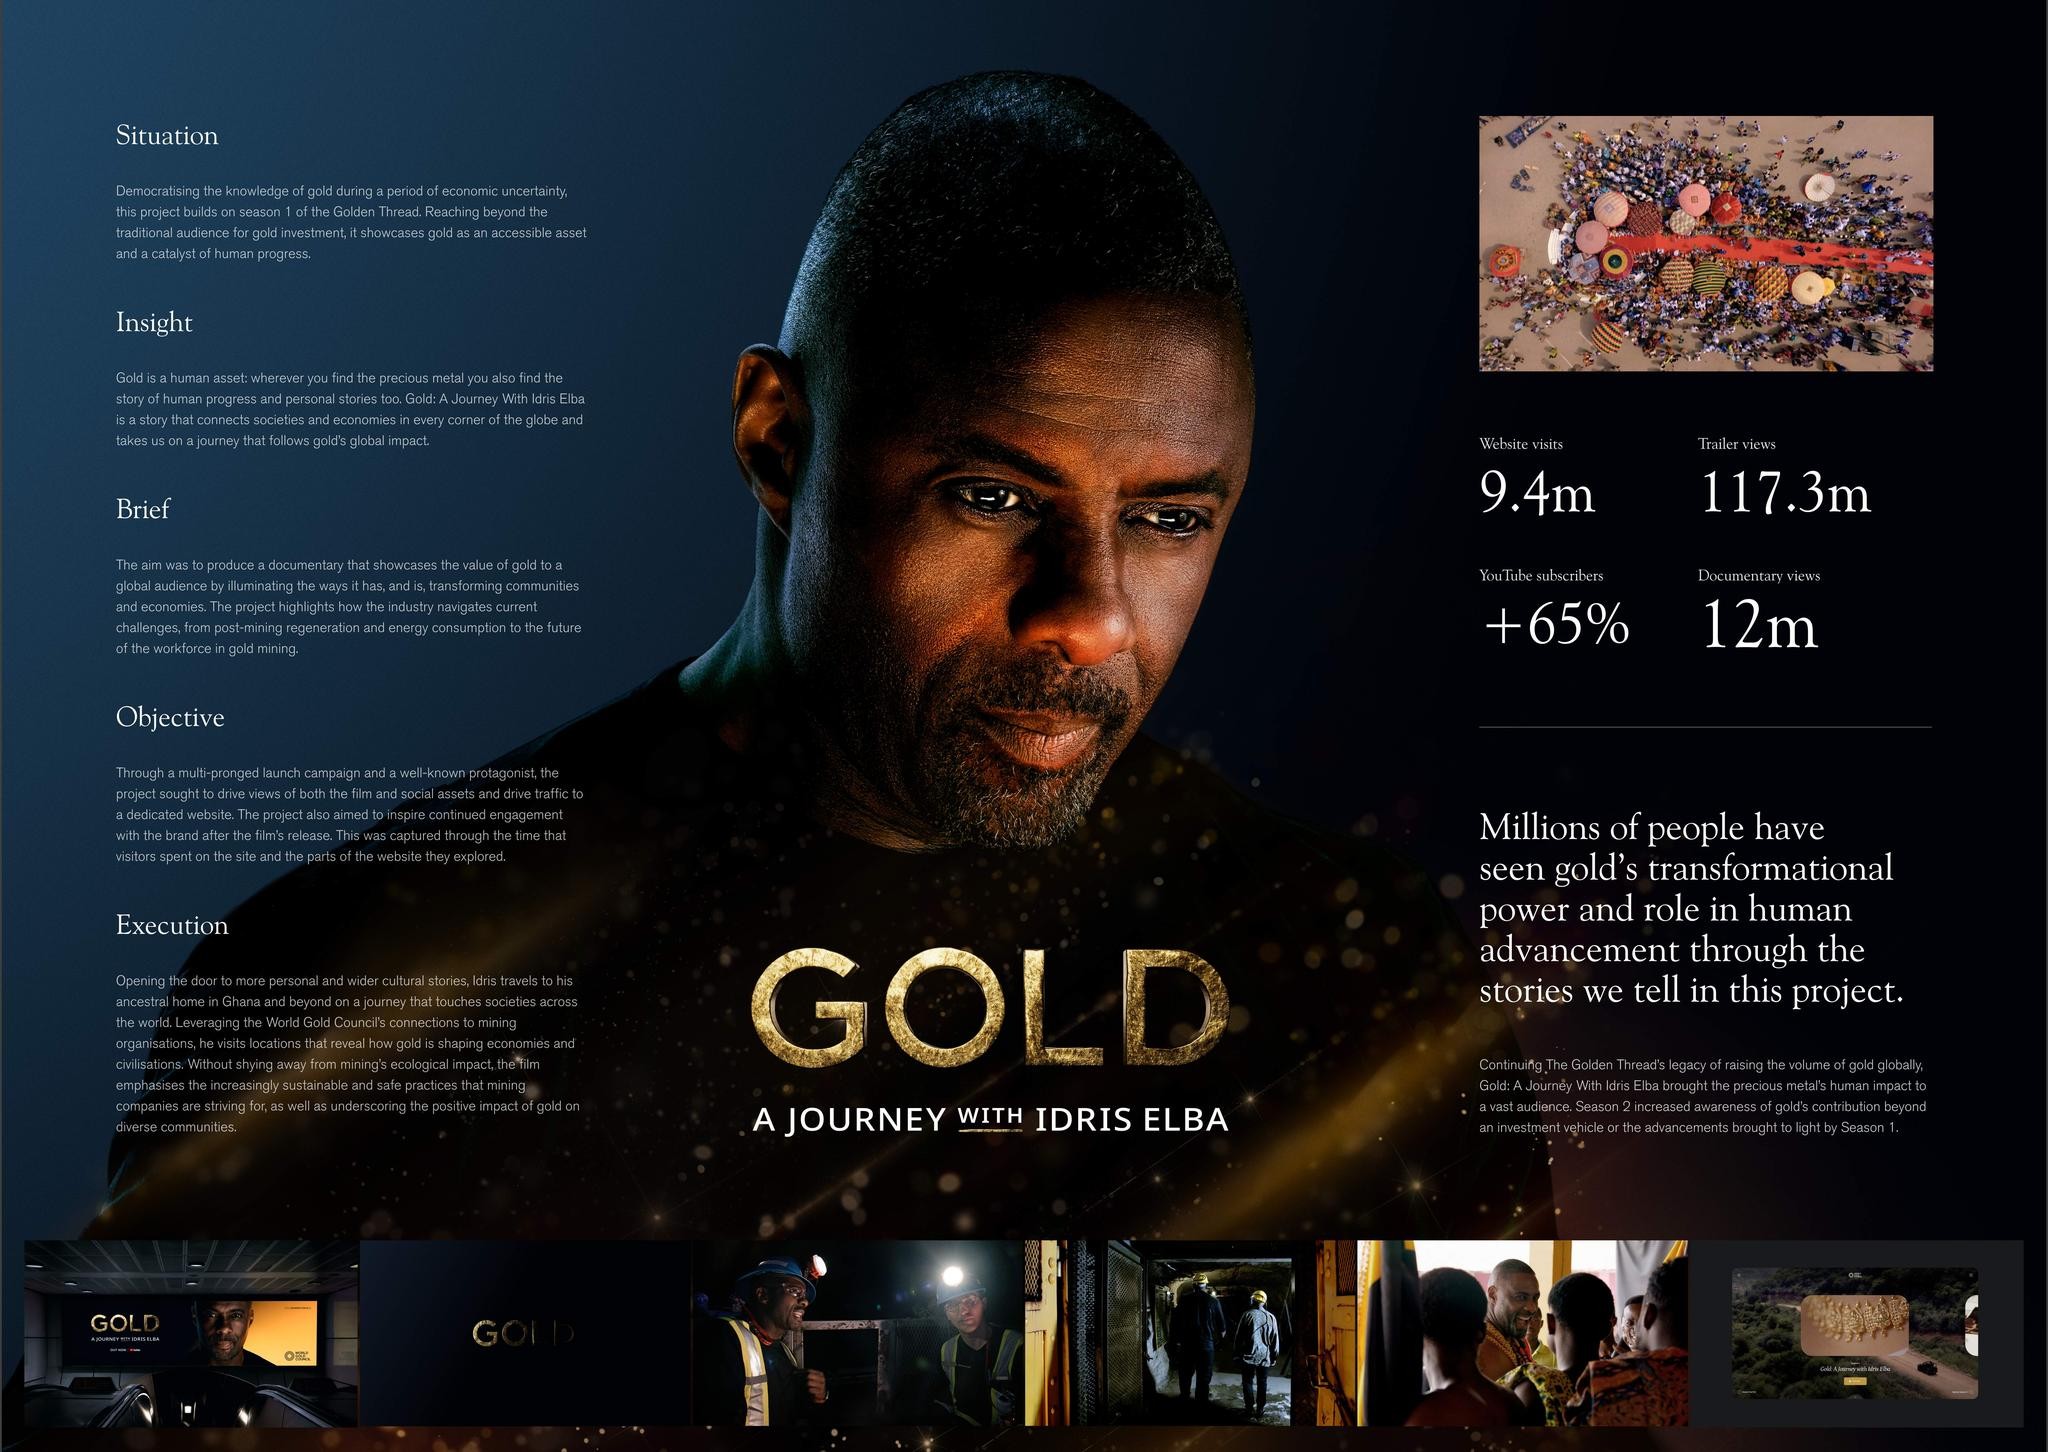 GOLD: A Journey With Idris Elba